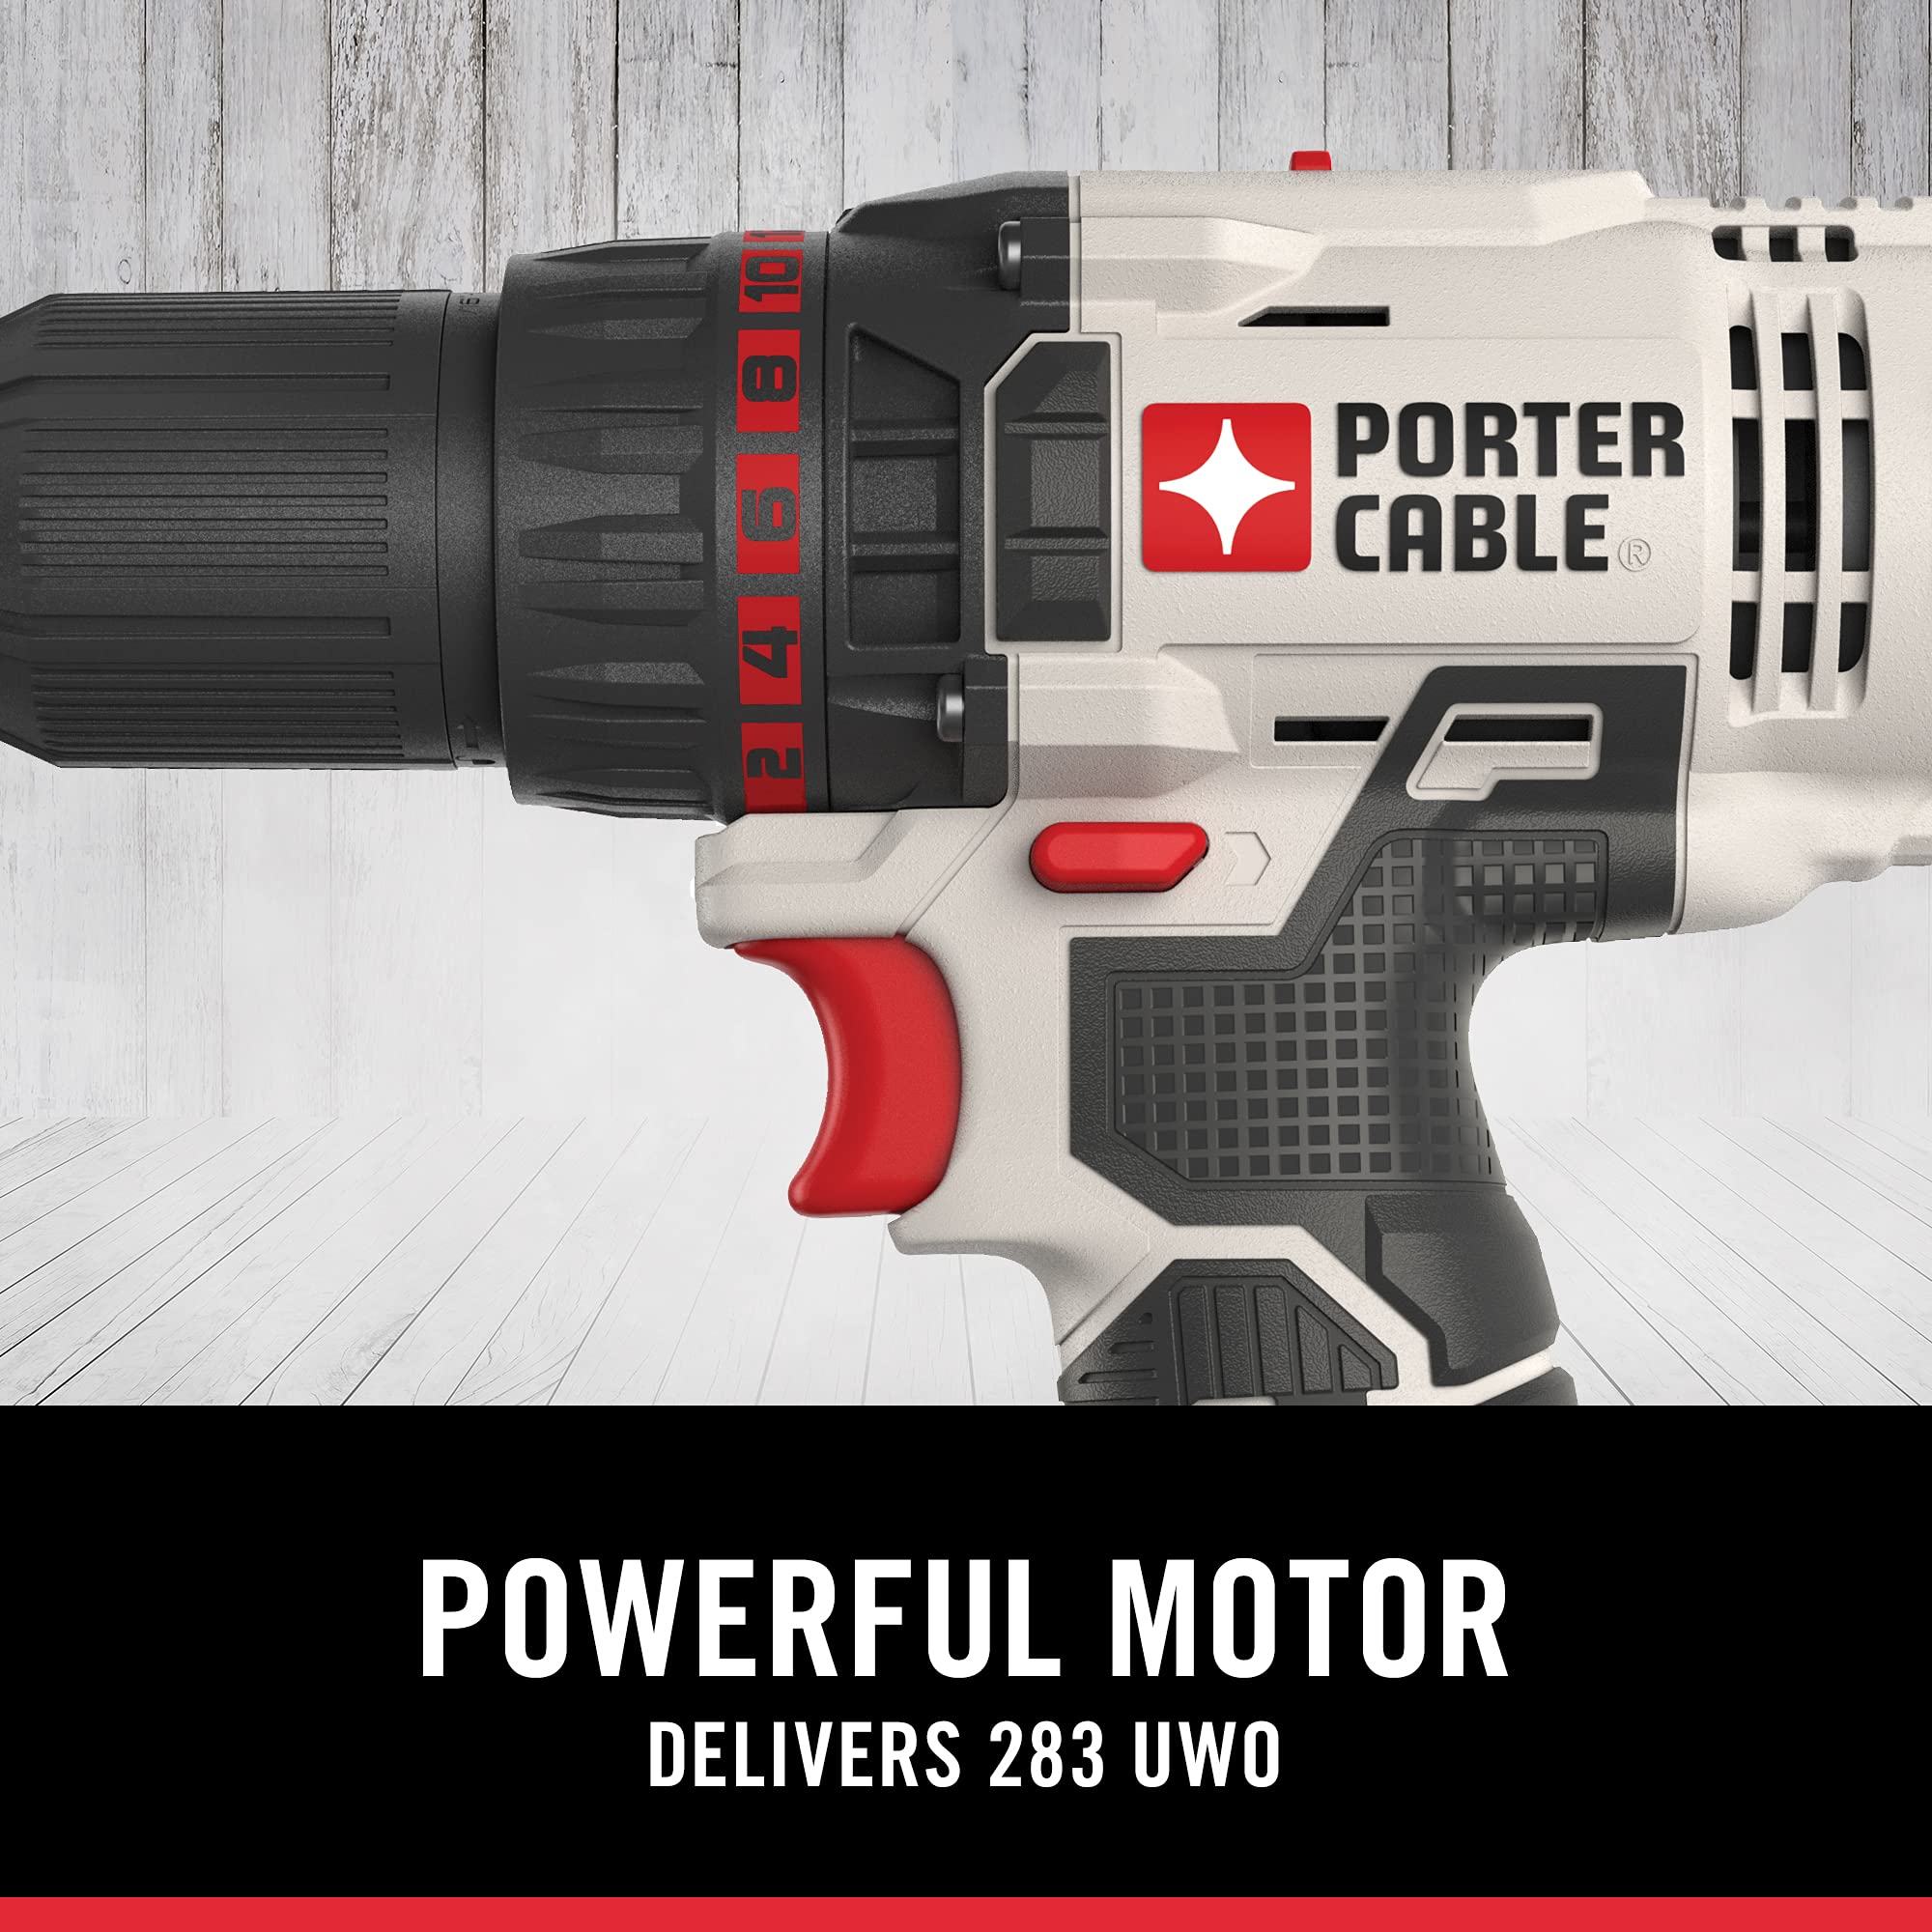 PORTER-CABLE 20V MAX* Cordless Drill/Driver, 1/2-Inch, Tool Only (PCC601LB)